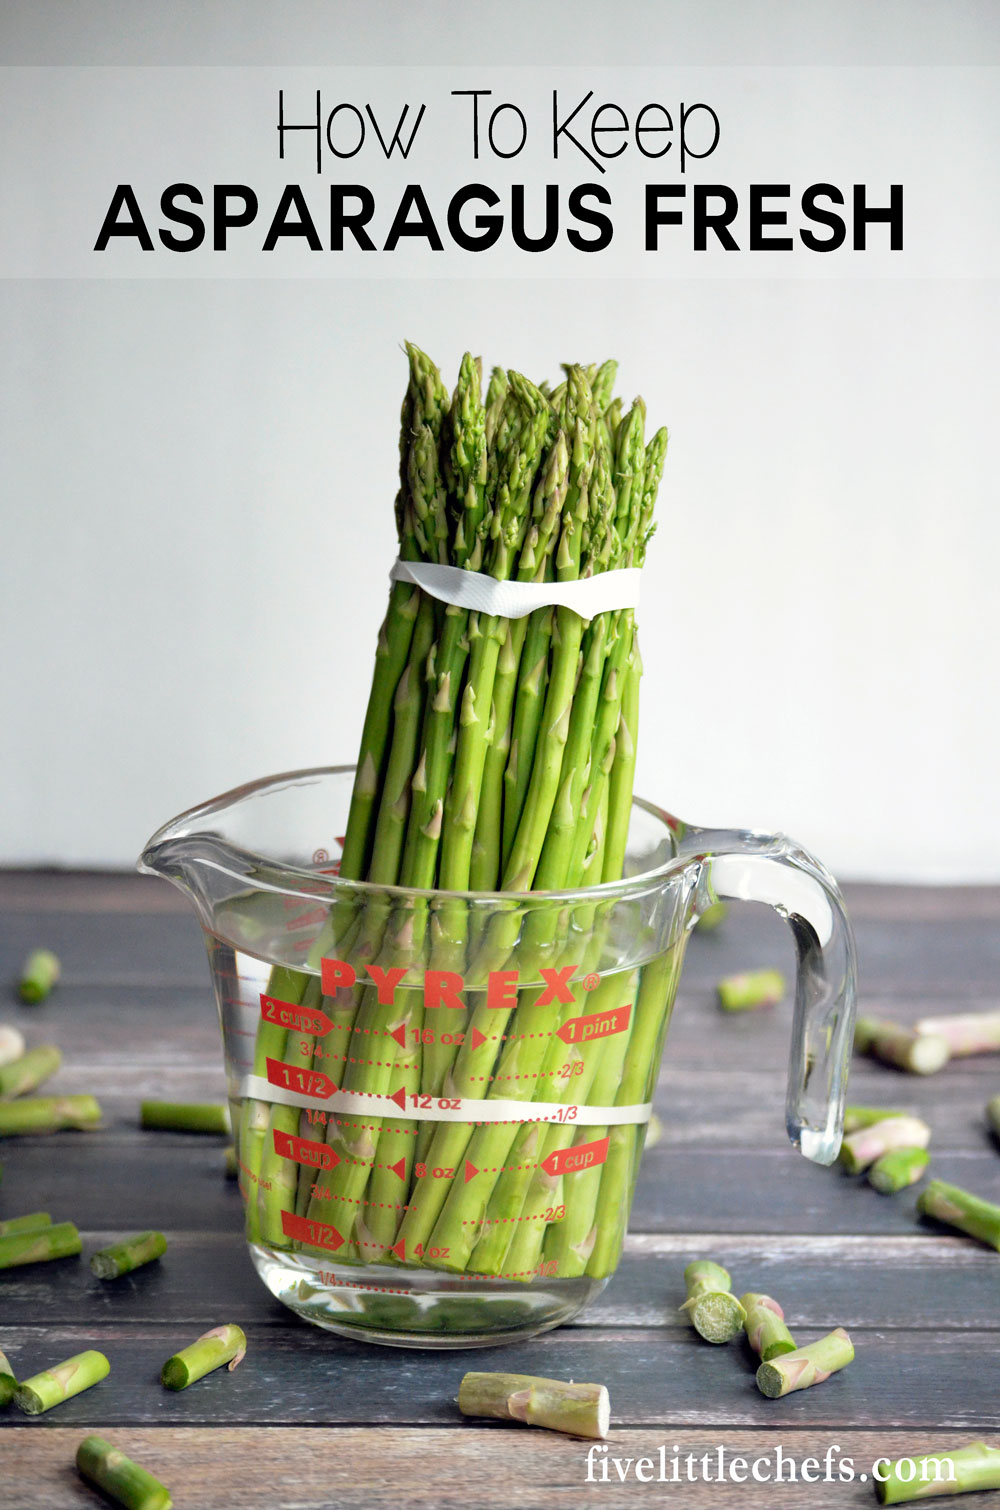 Tips on how to keep asparagus fresh for up to a week.